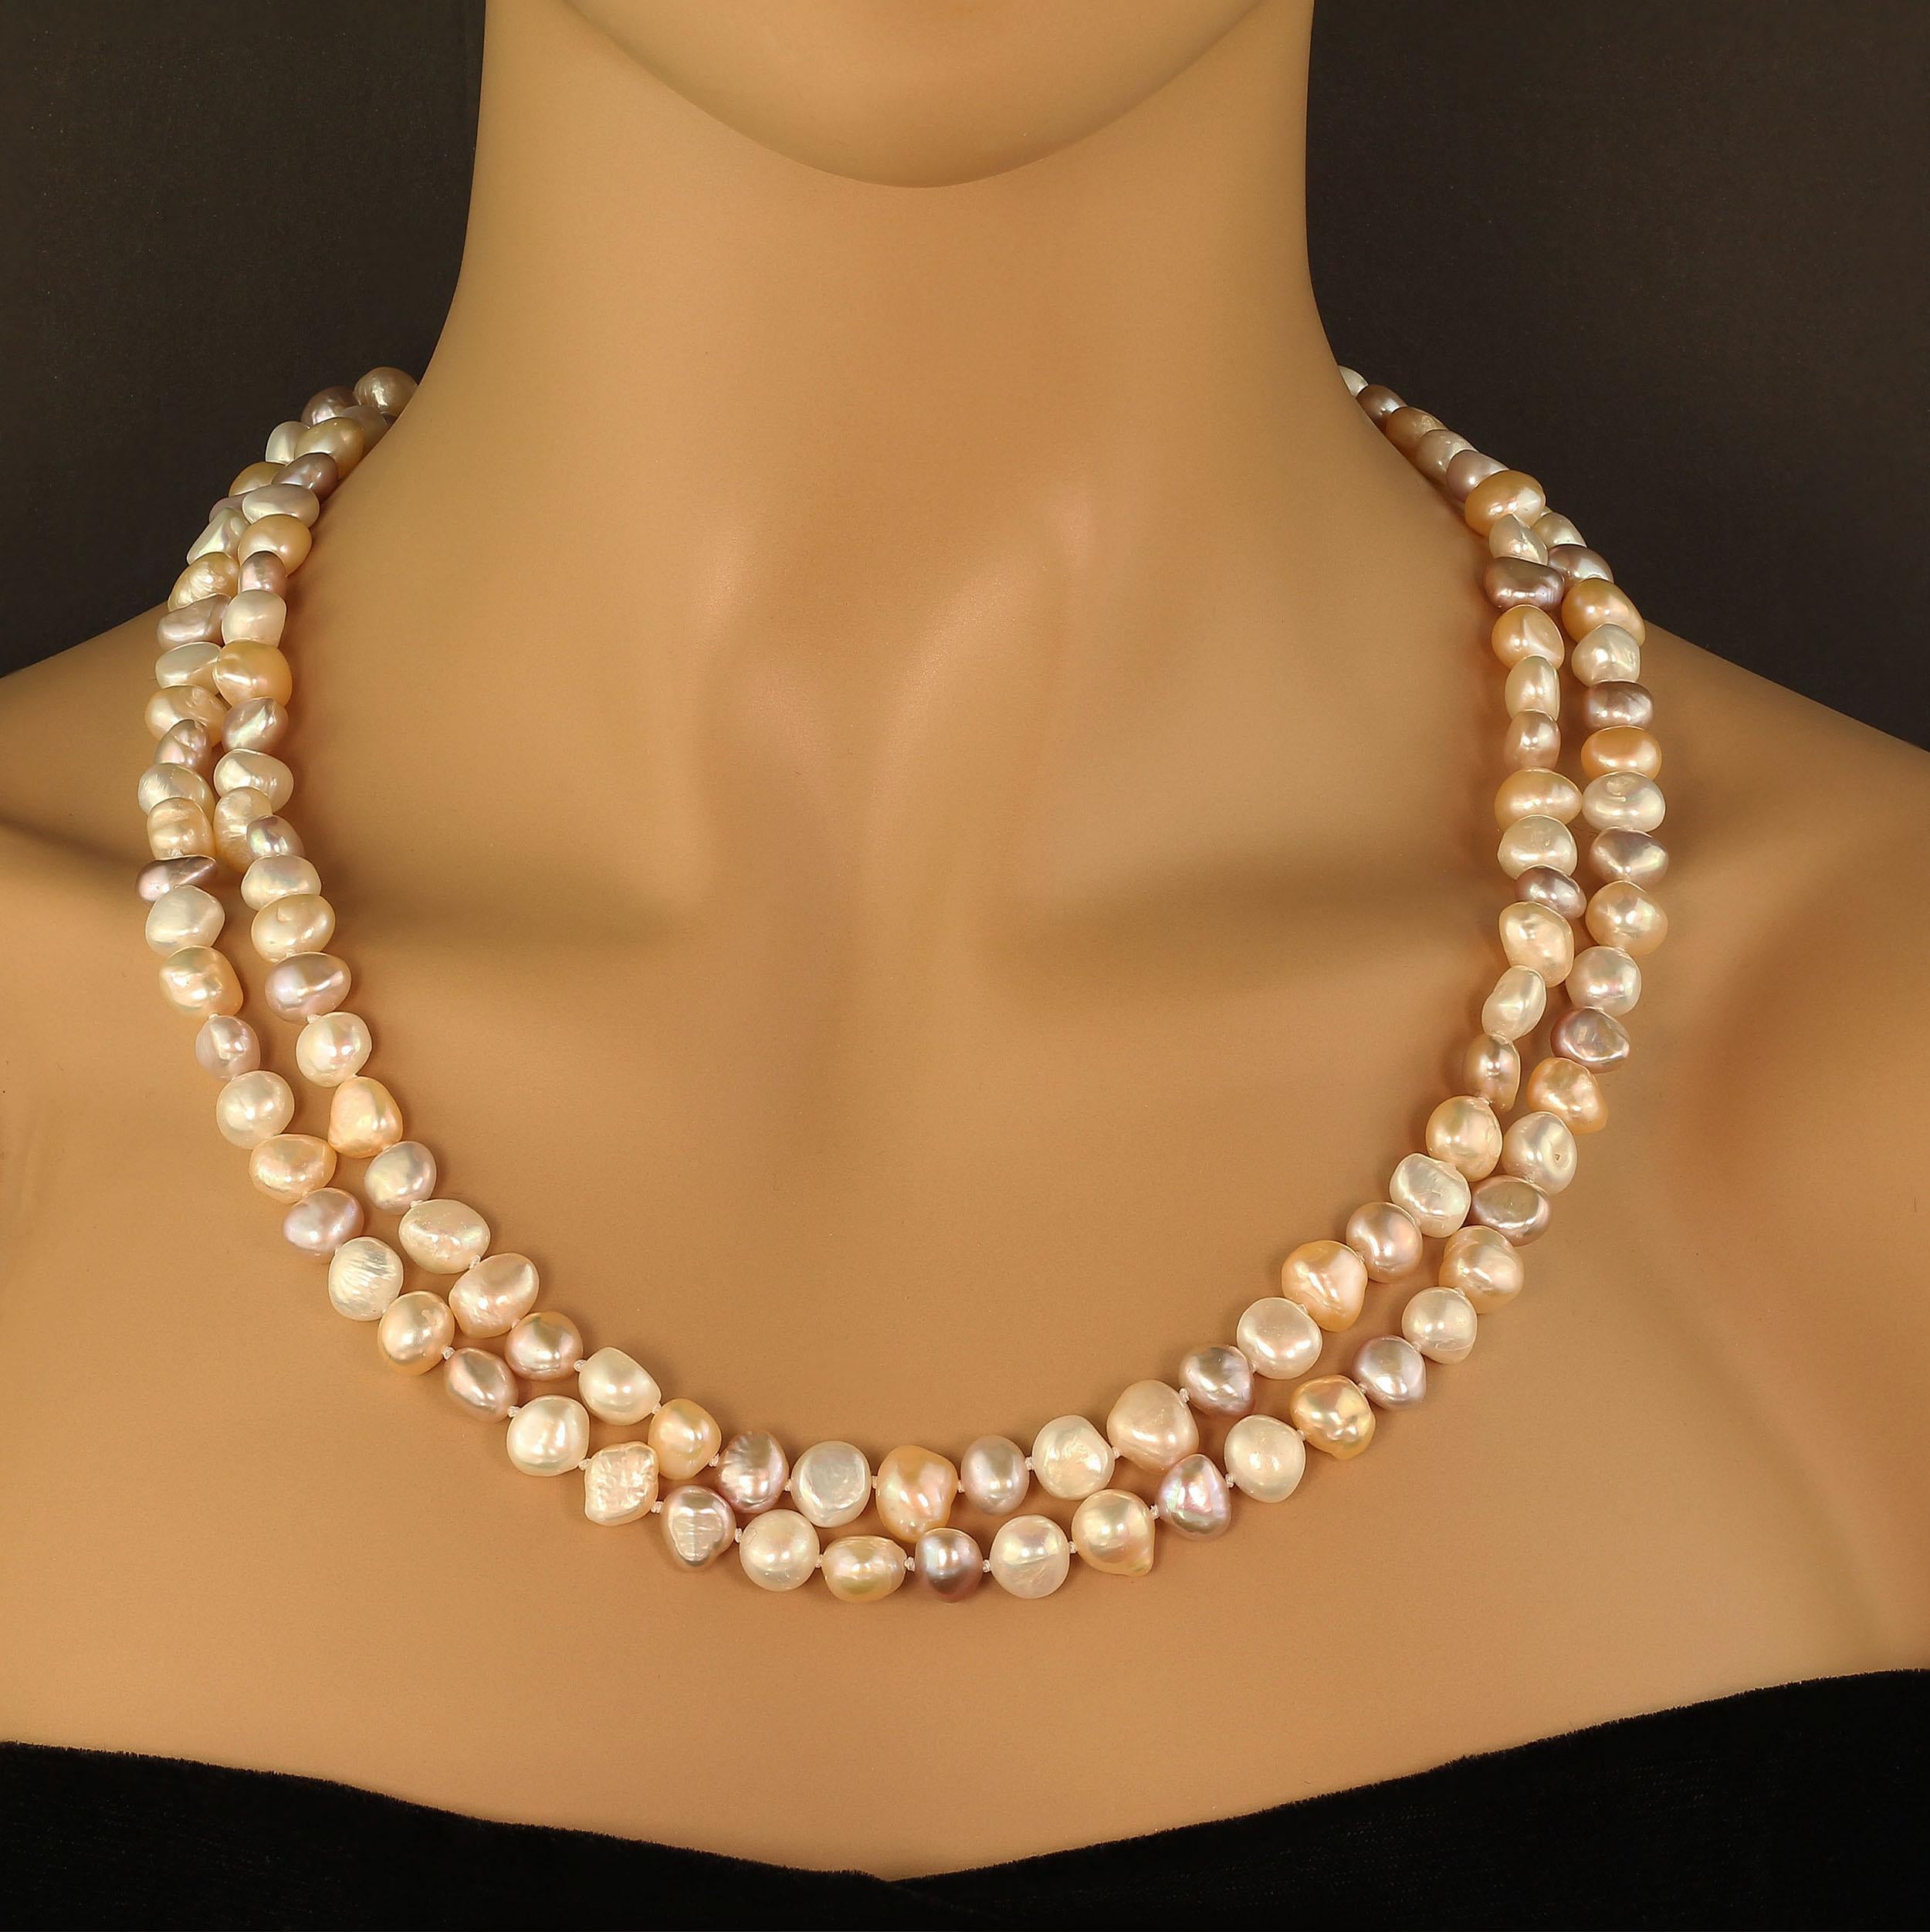 Artisan AJD 60 Continuous Inches of Gorgeous Pearls June birthstone  Great Gift!!